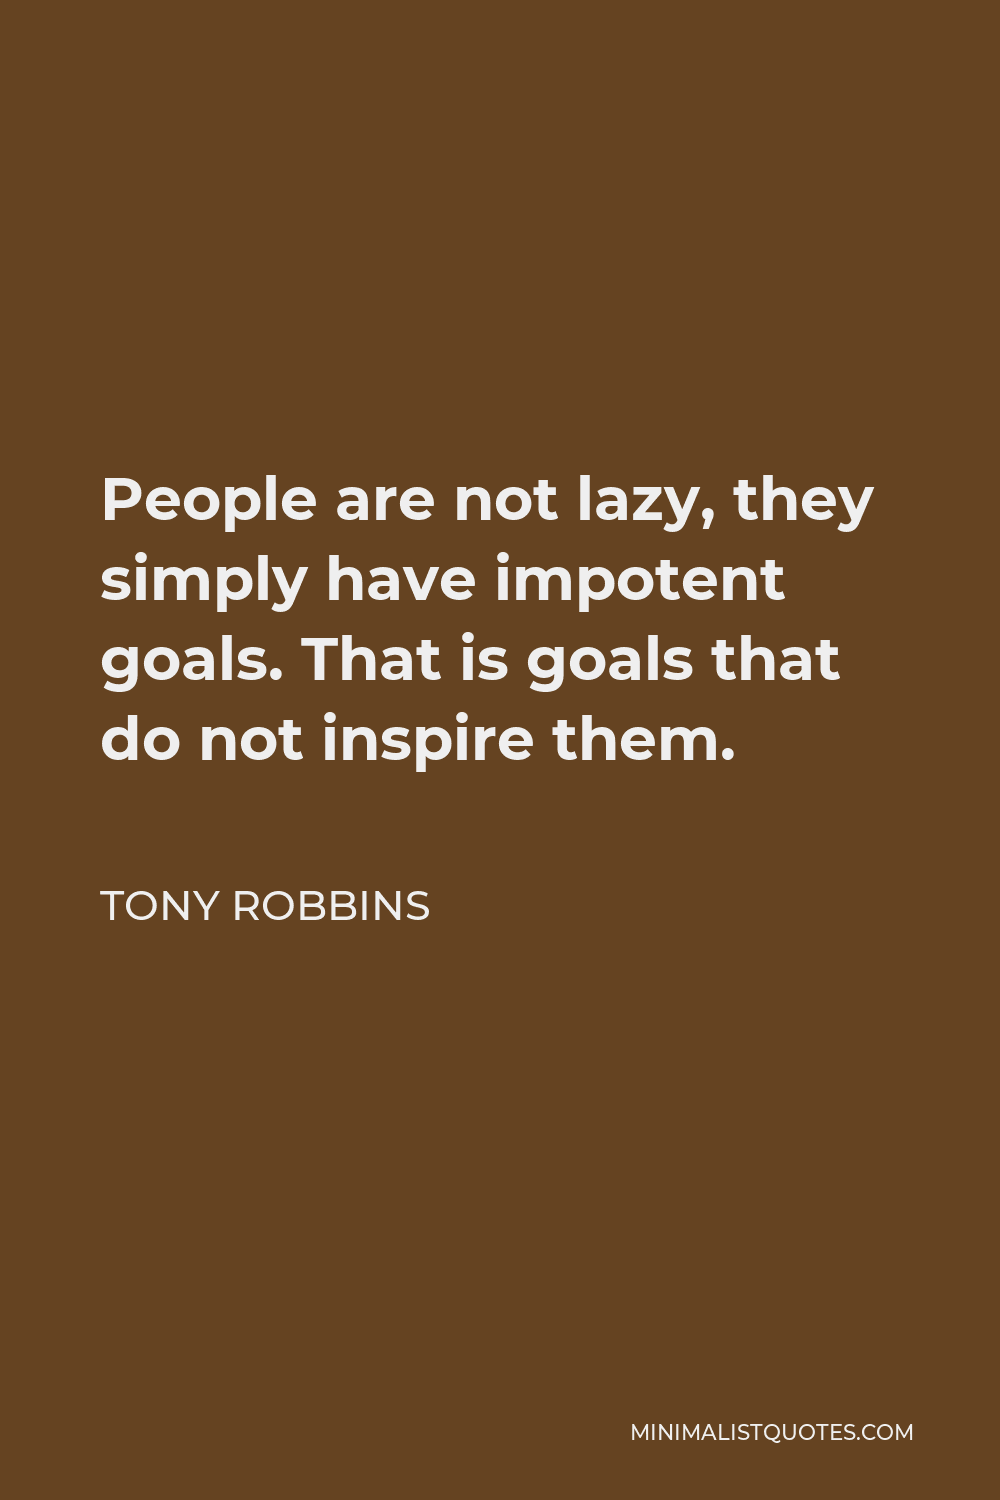 Tony Robbins Quote - People are not lazy, they simply have impotent goals. That is goals that do not inspire them.